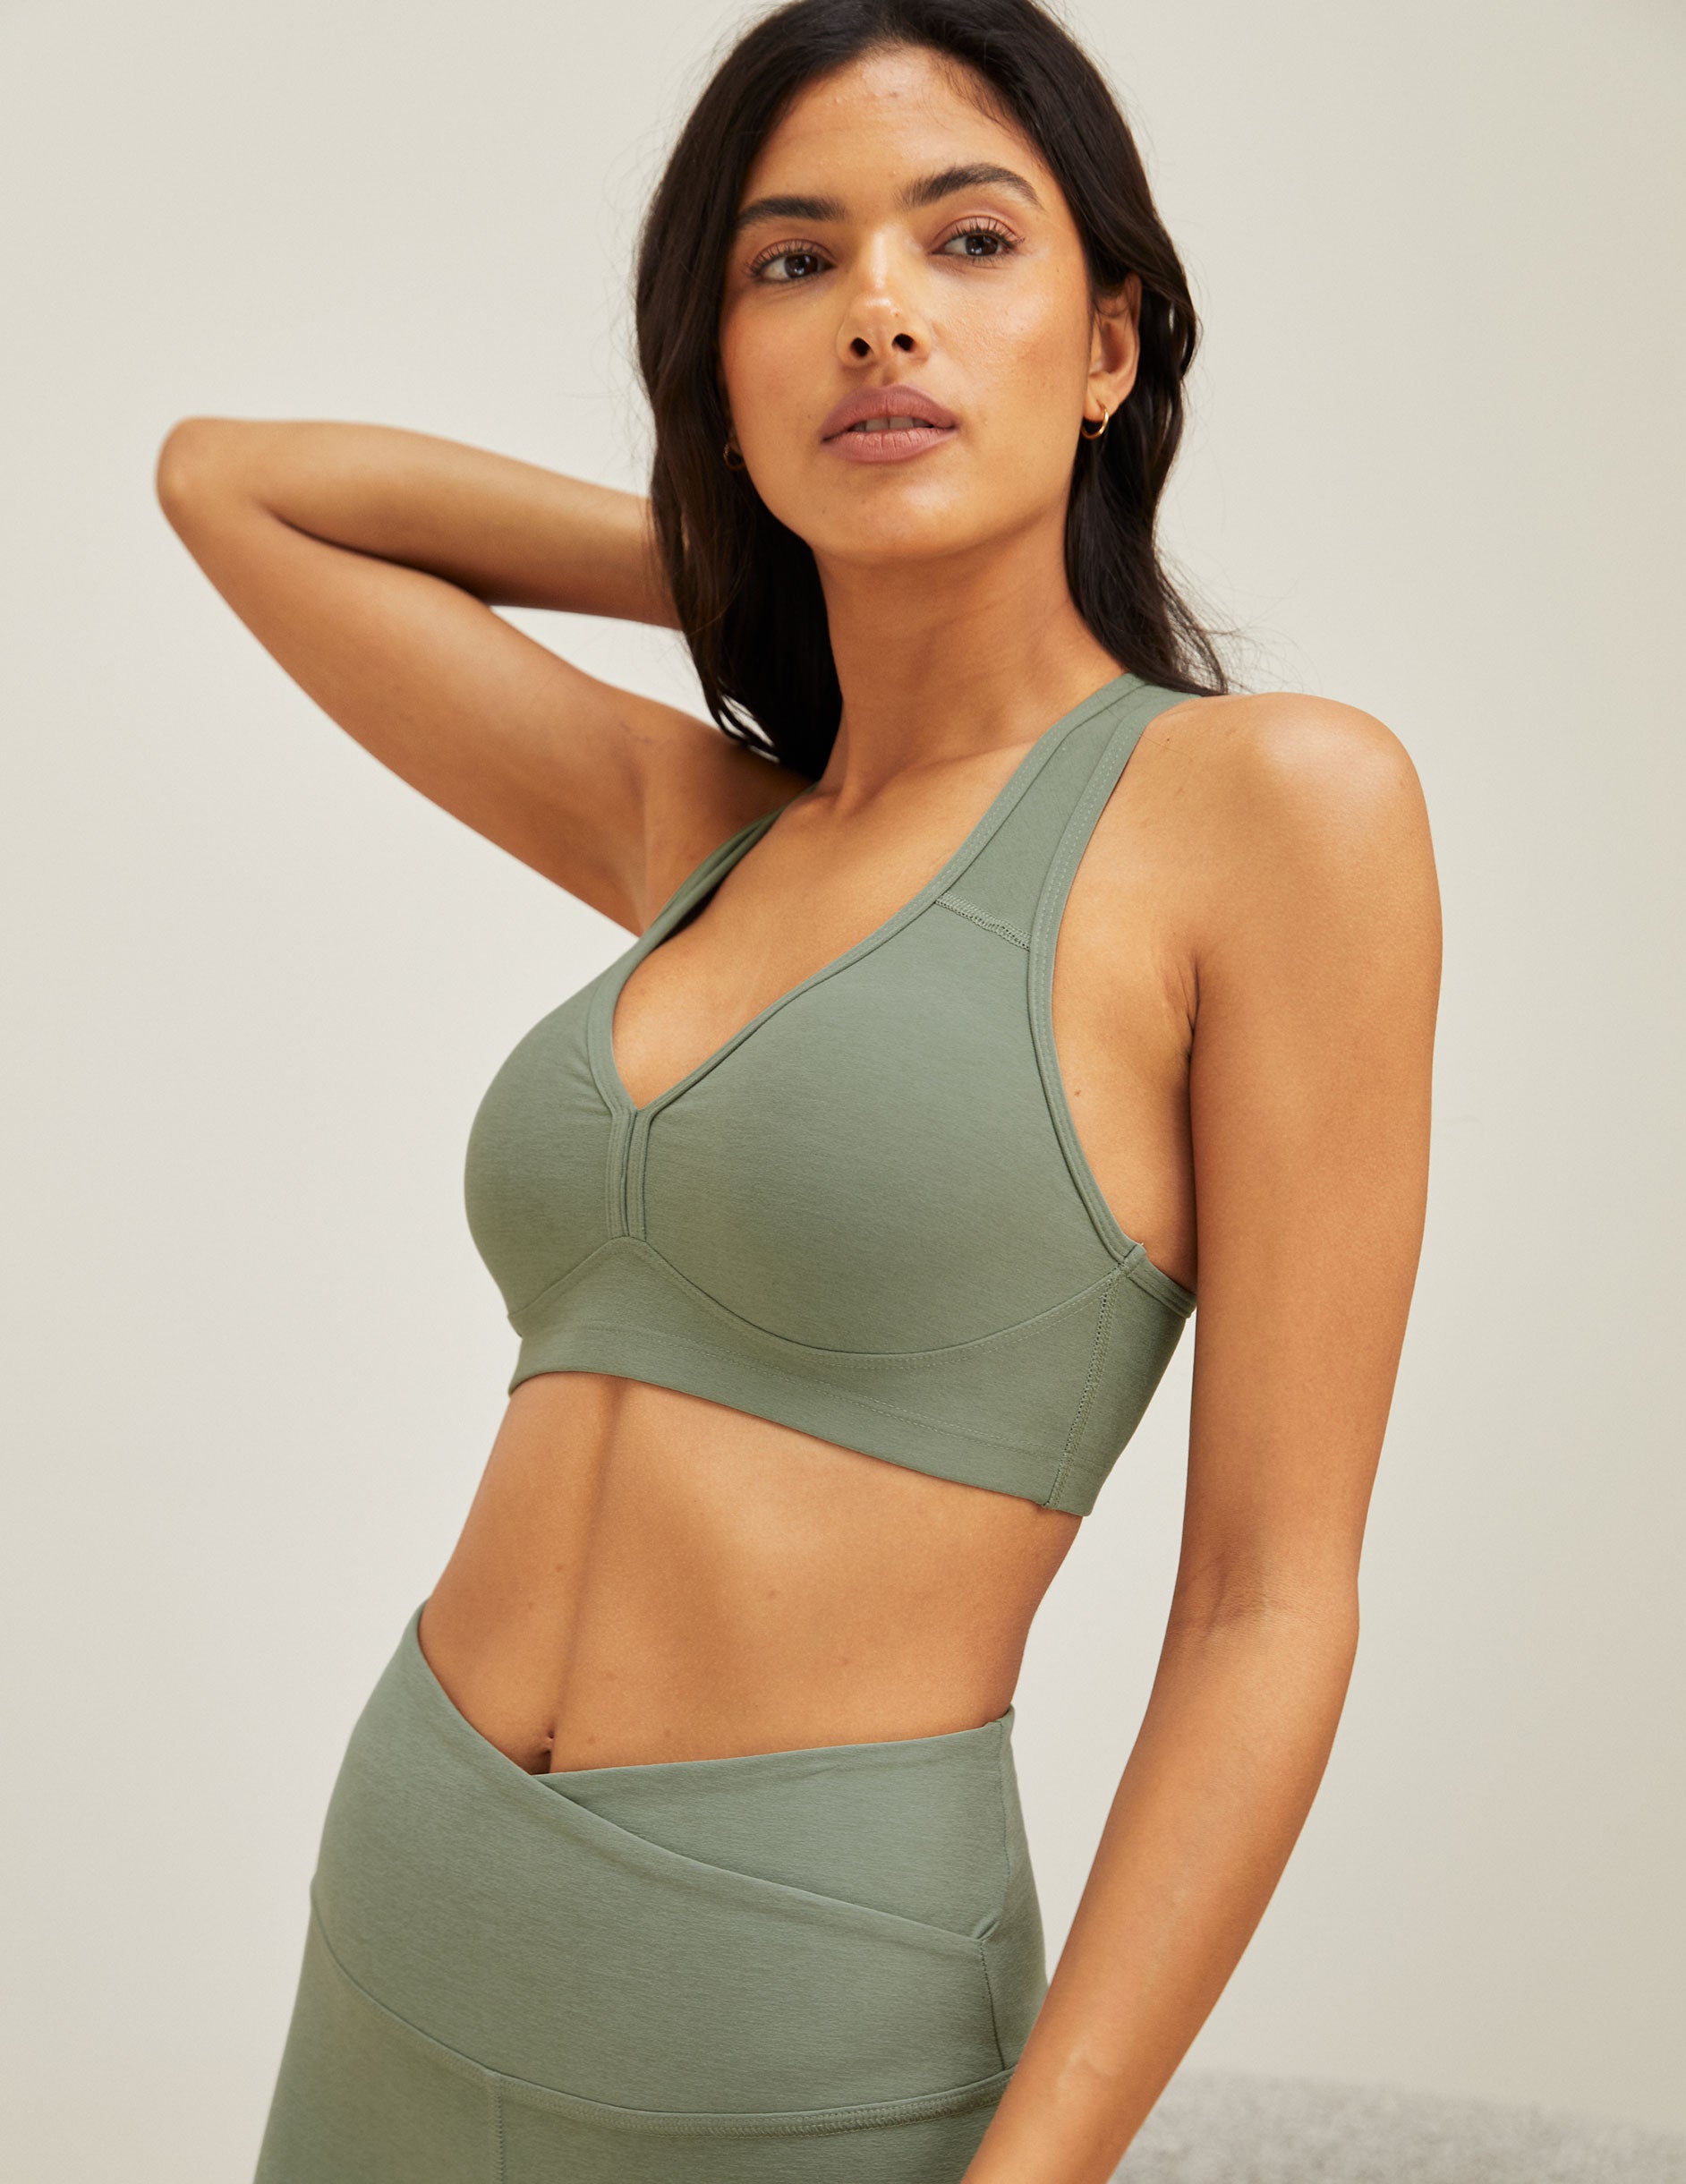 And my hazy jade set came today! Energy bra long line (4) and align legging  25” (4). I probably should have sized up to a 6 in the bra, does this  style's “